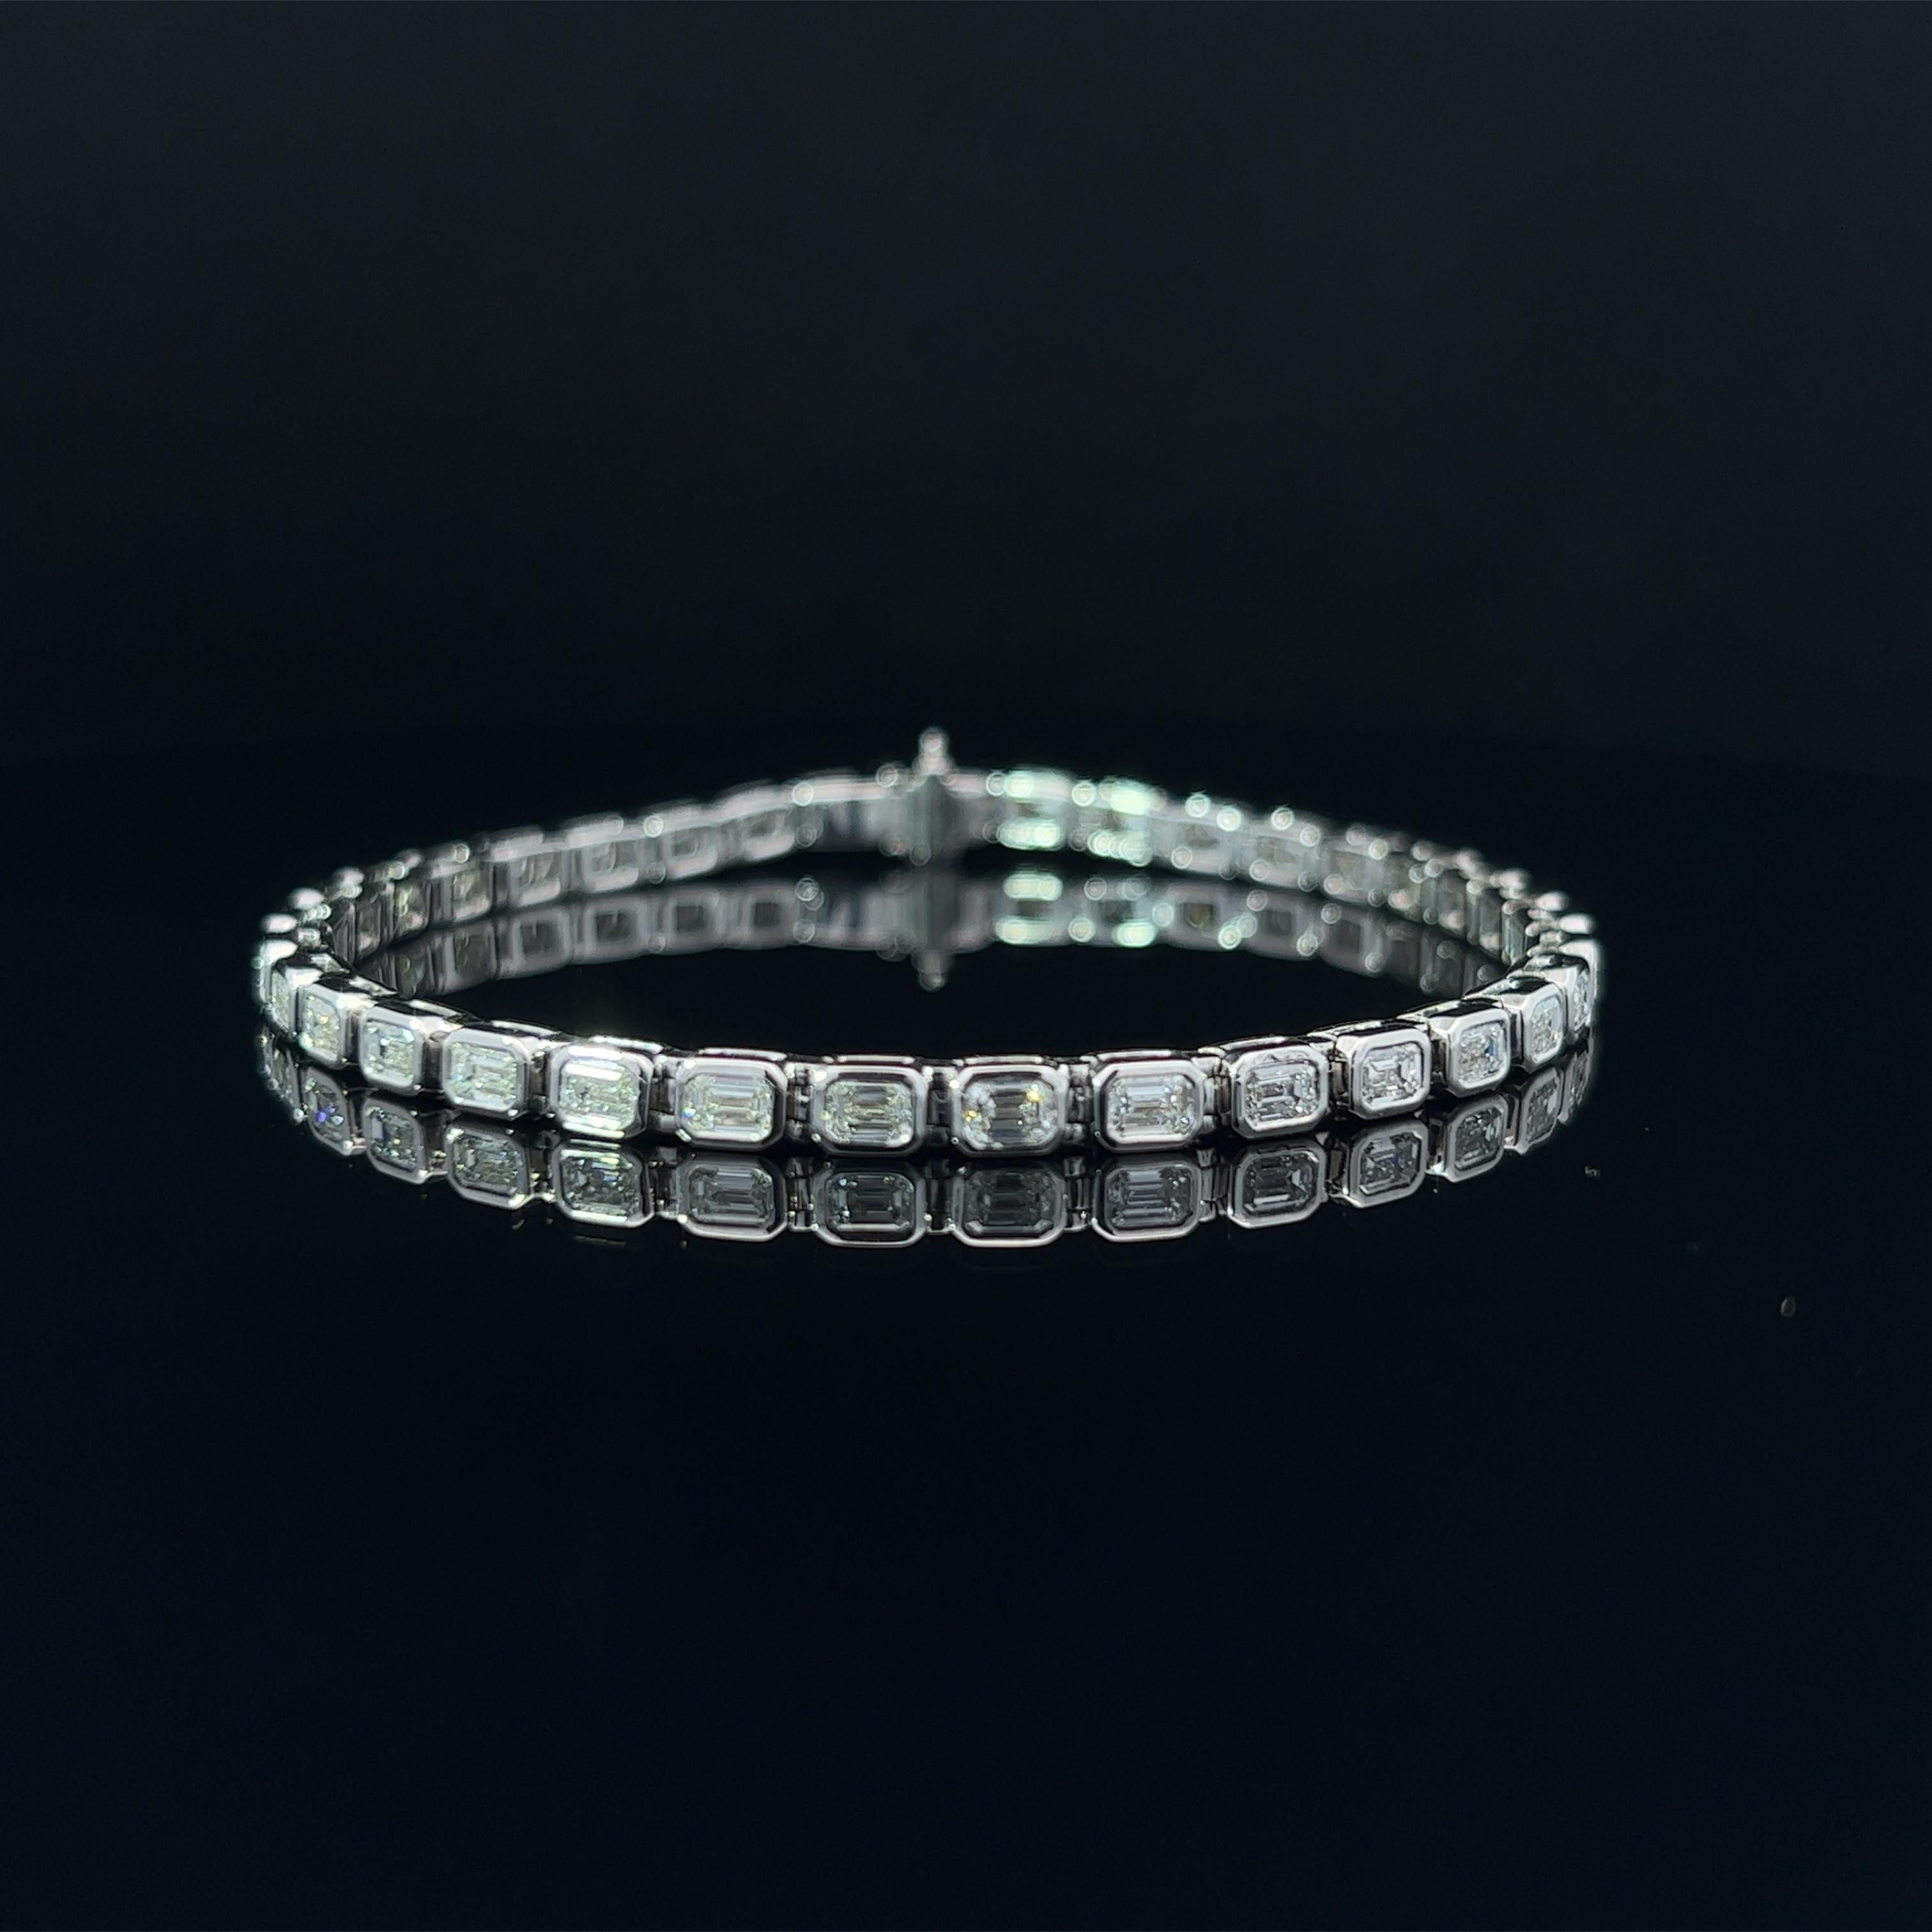 Diamond Shape: Emerald Cut  
Total Diamond Weight: 4.3ct
Individual Diamond Weight: .10ct
Color/Clarity: FG VVS  
Metal: 18K White Gold 
Metal Weight: 14.19g

Key Features:

Emerald-Cut Diamonds: The centerpiece of this bracelet is a series of